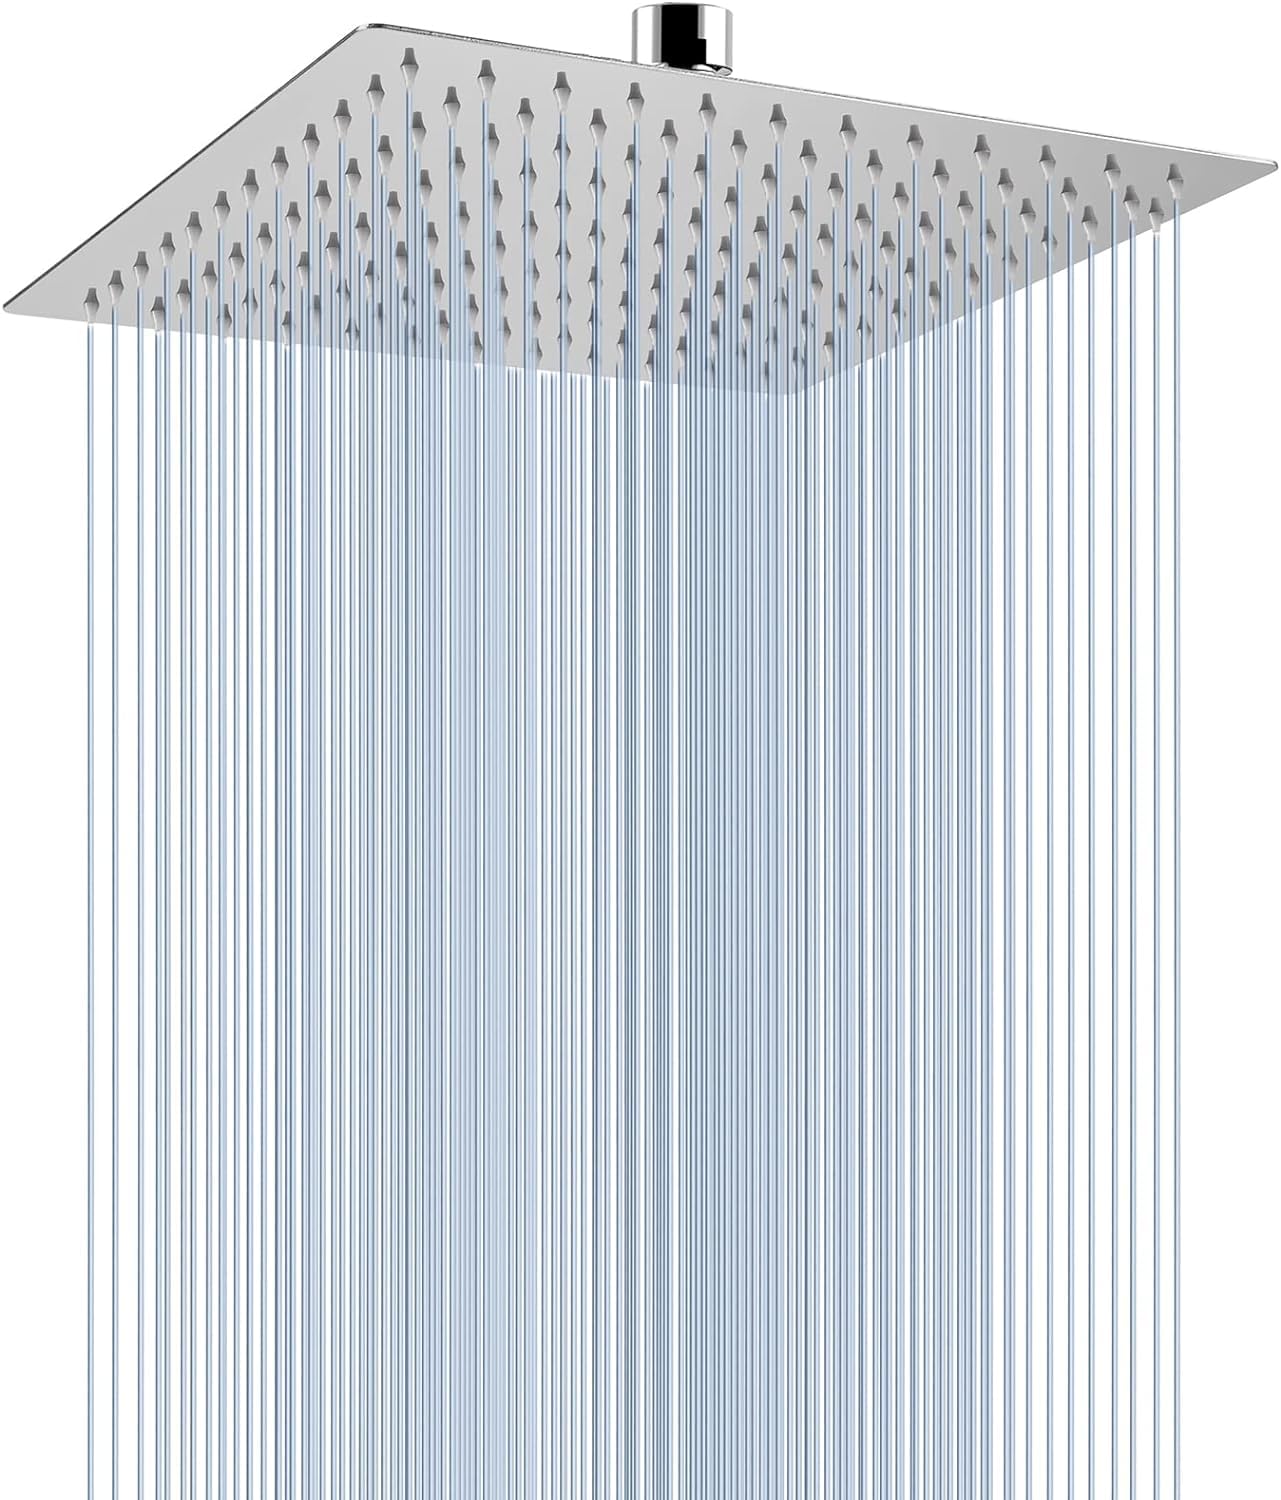 Fossa 10X10 Inch Rain Shower - Fossa Square High Pressure Shower Head Made of 304 Stainless Steel ( Without ARM )